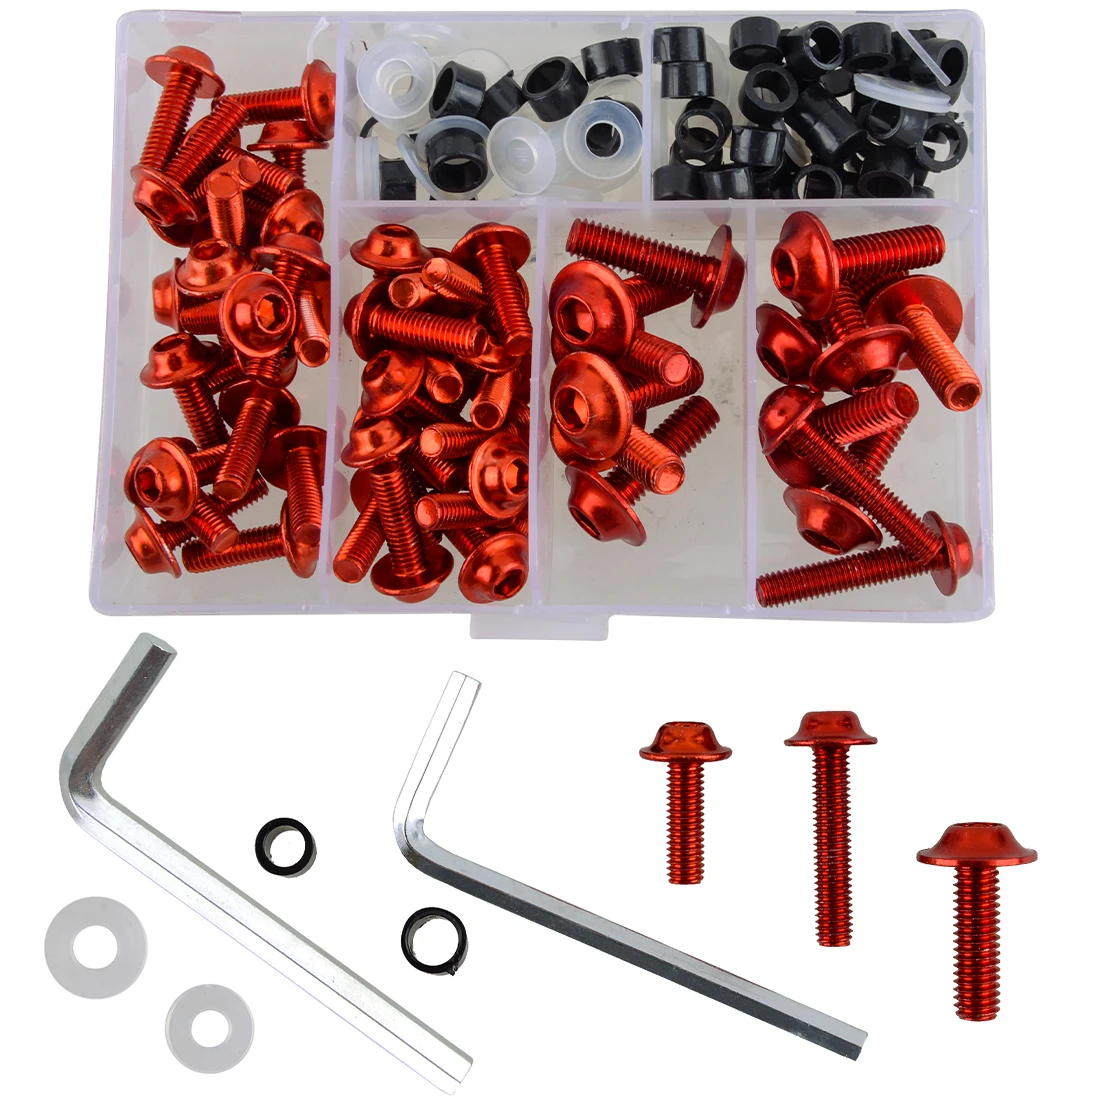 

158pcs Red Fairing Bolts Kit Fender Windscreen Fastener Clips Screws Motorcycle Sportbike Accessories For Upper Lower Fairing